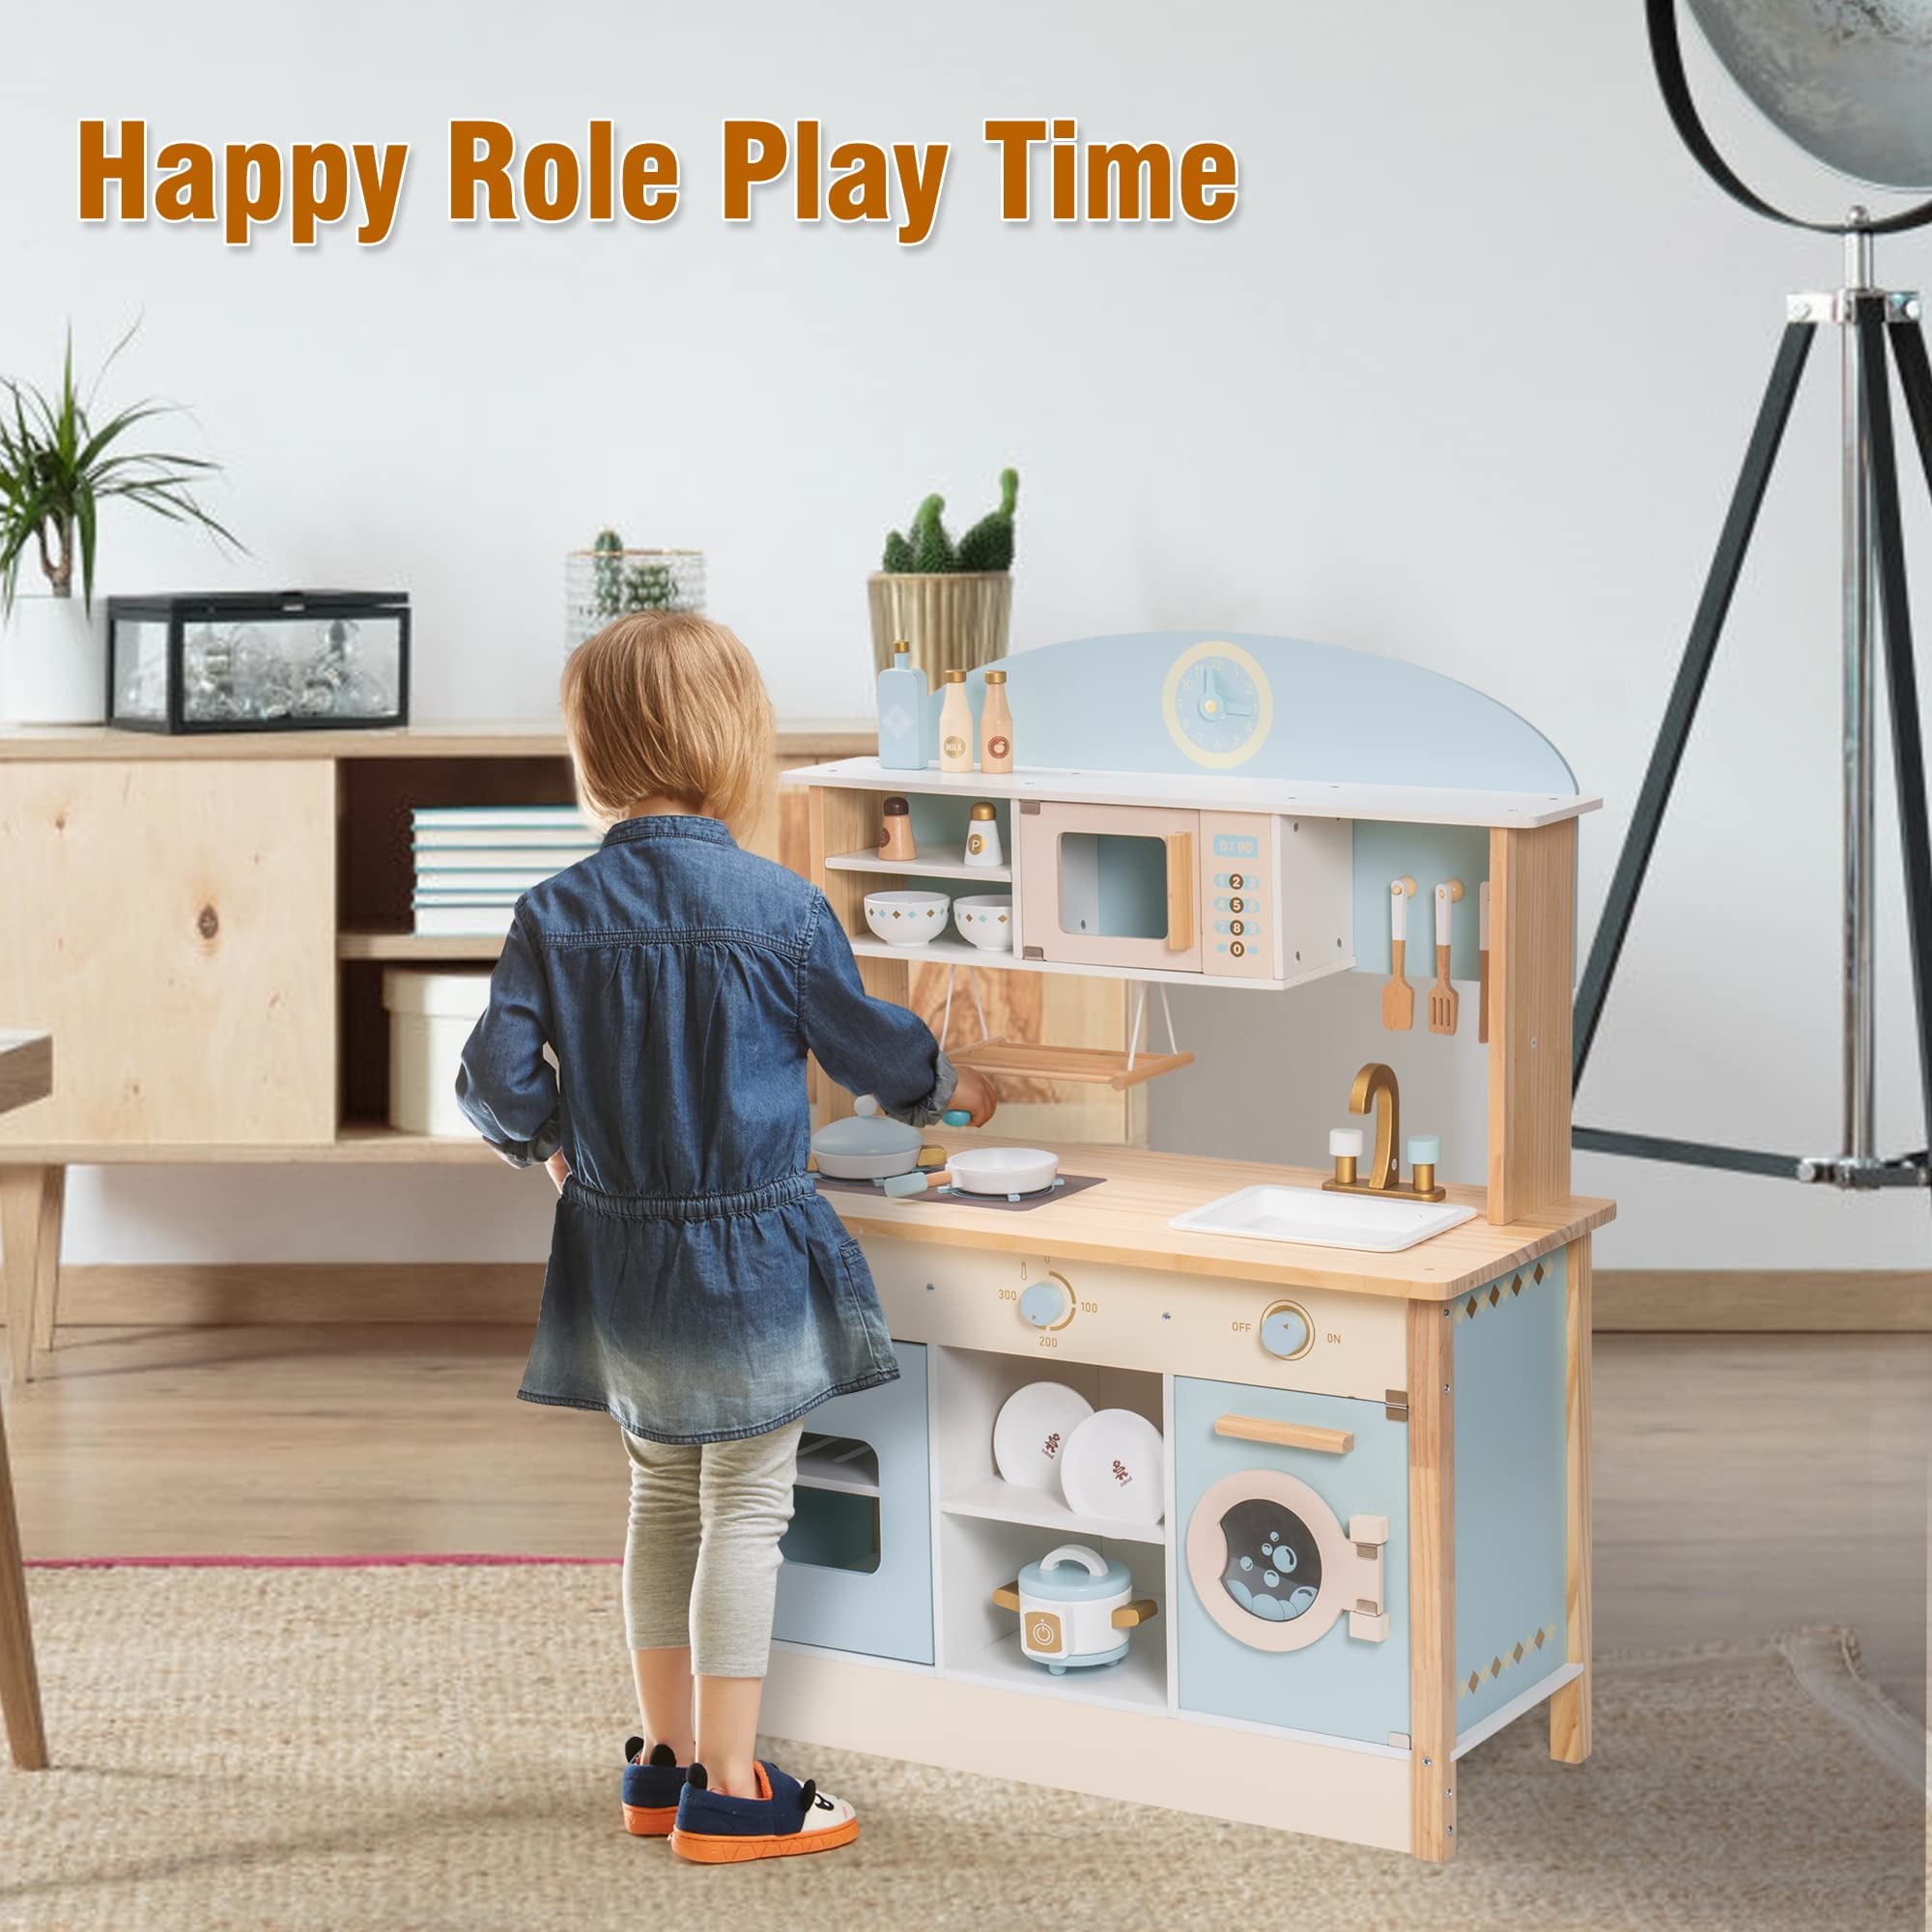 Robud Wooden Kitchen Pretend Play Set with Accessories for kids & toddler  WCF14